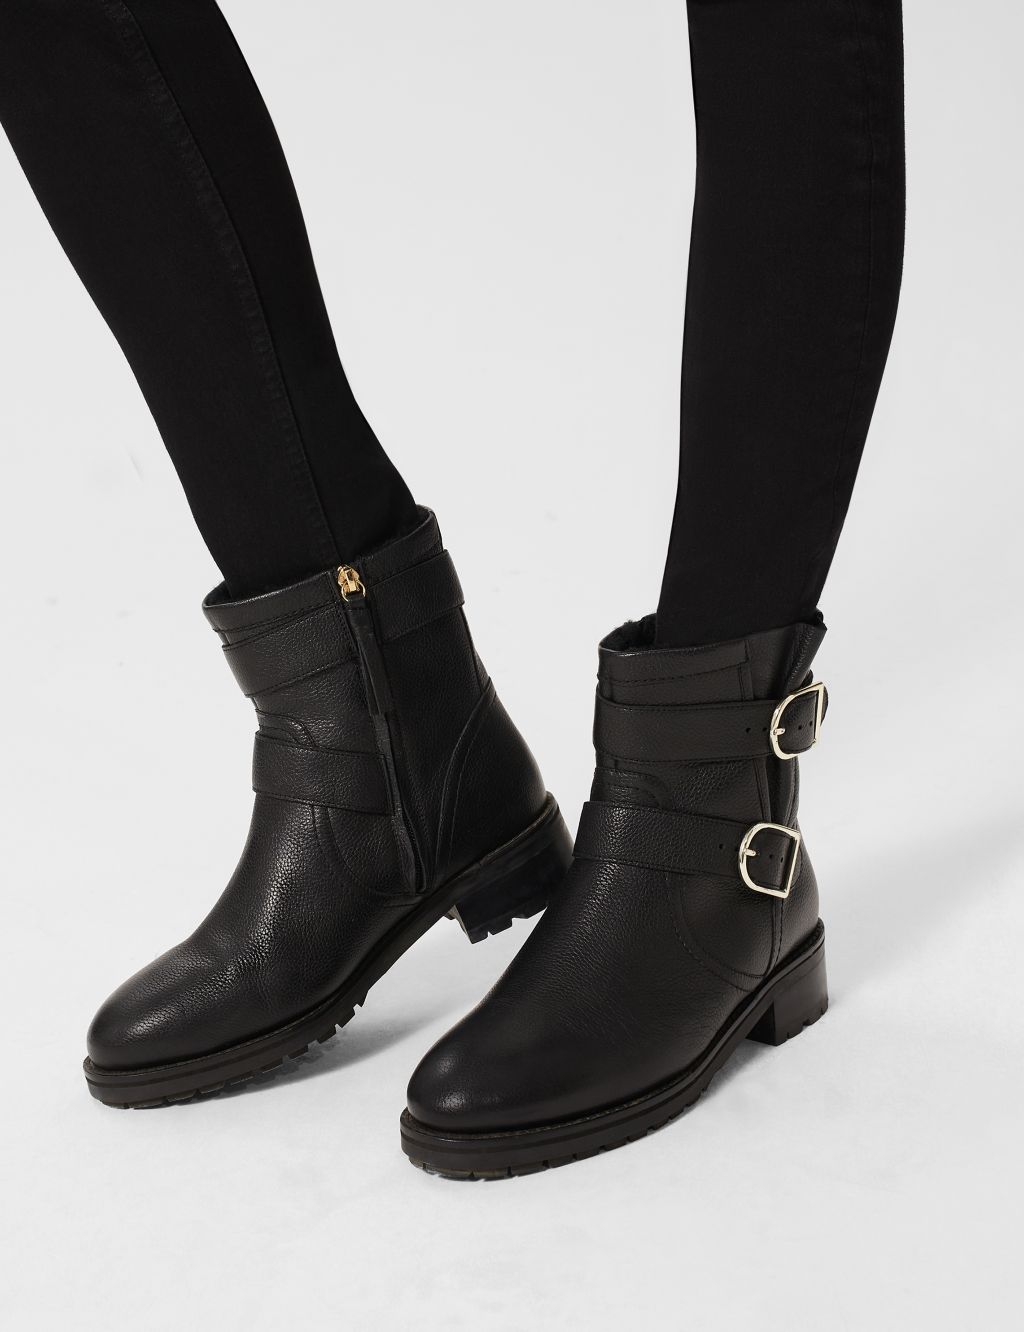 Leather Patent Biker Block Heel Ankle Boots image 2